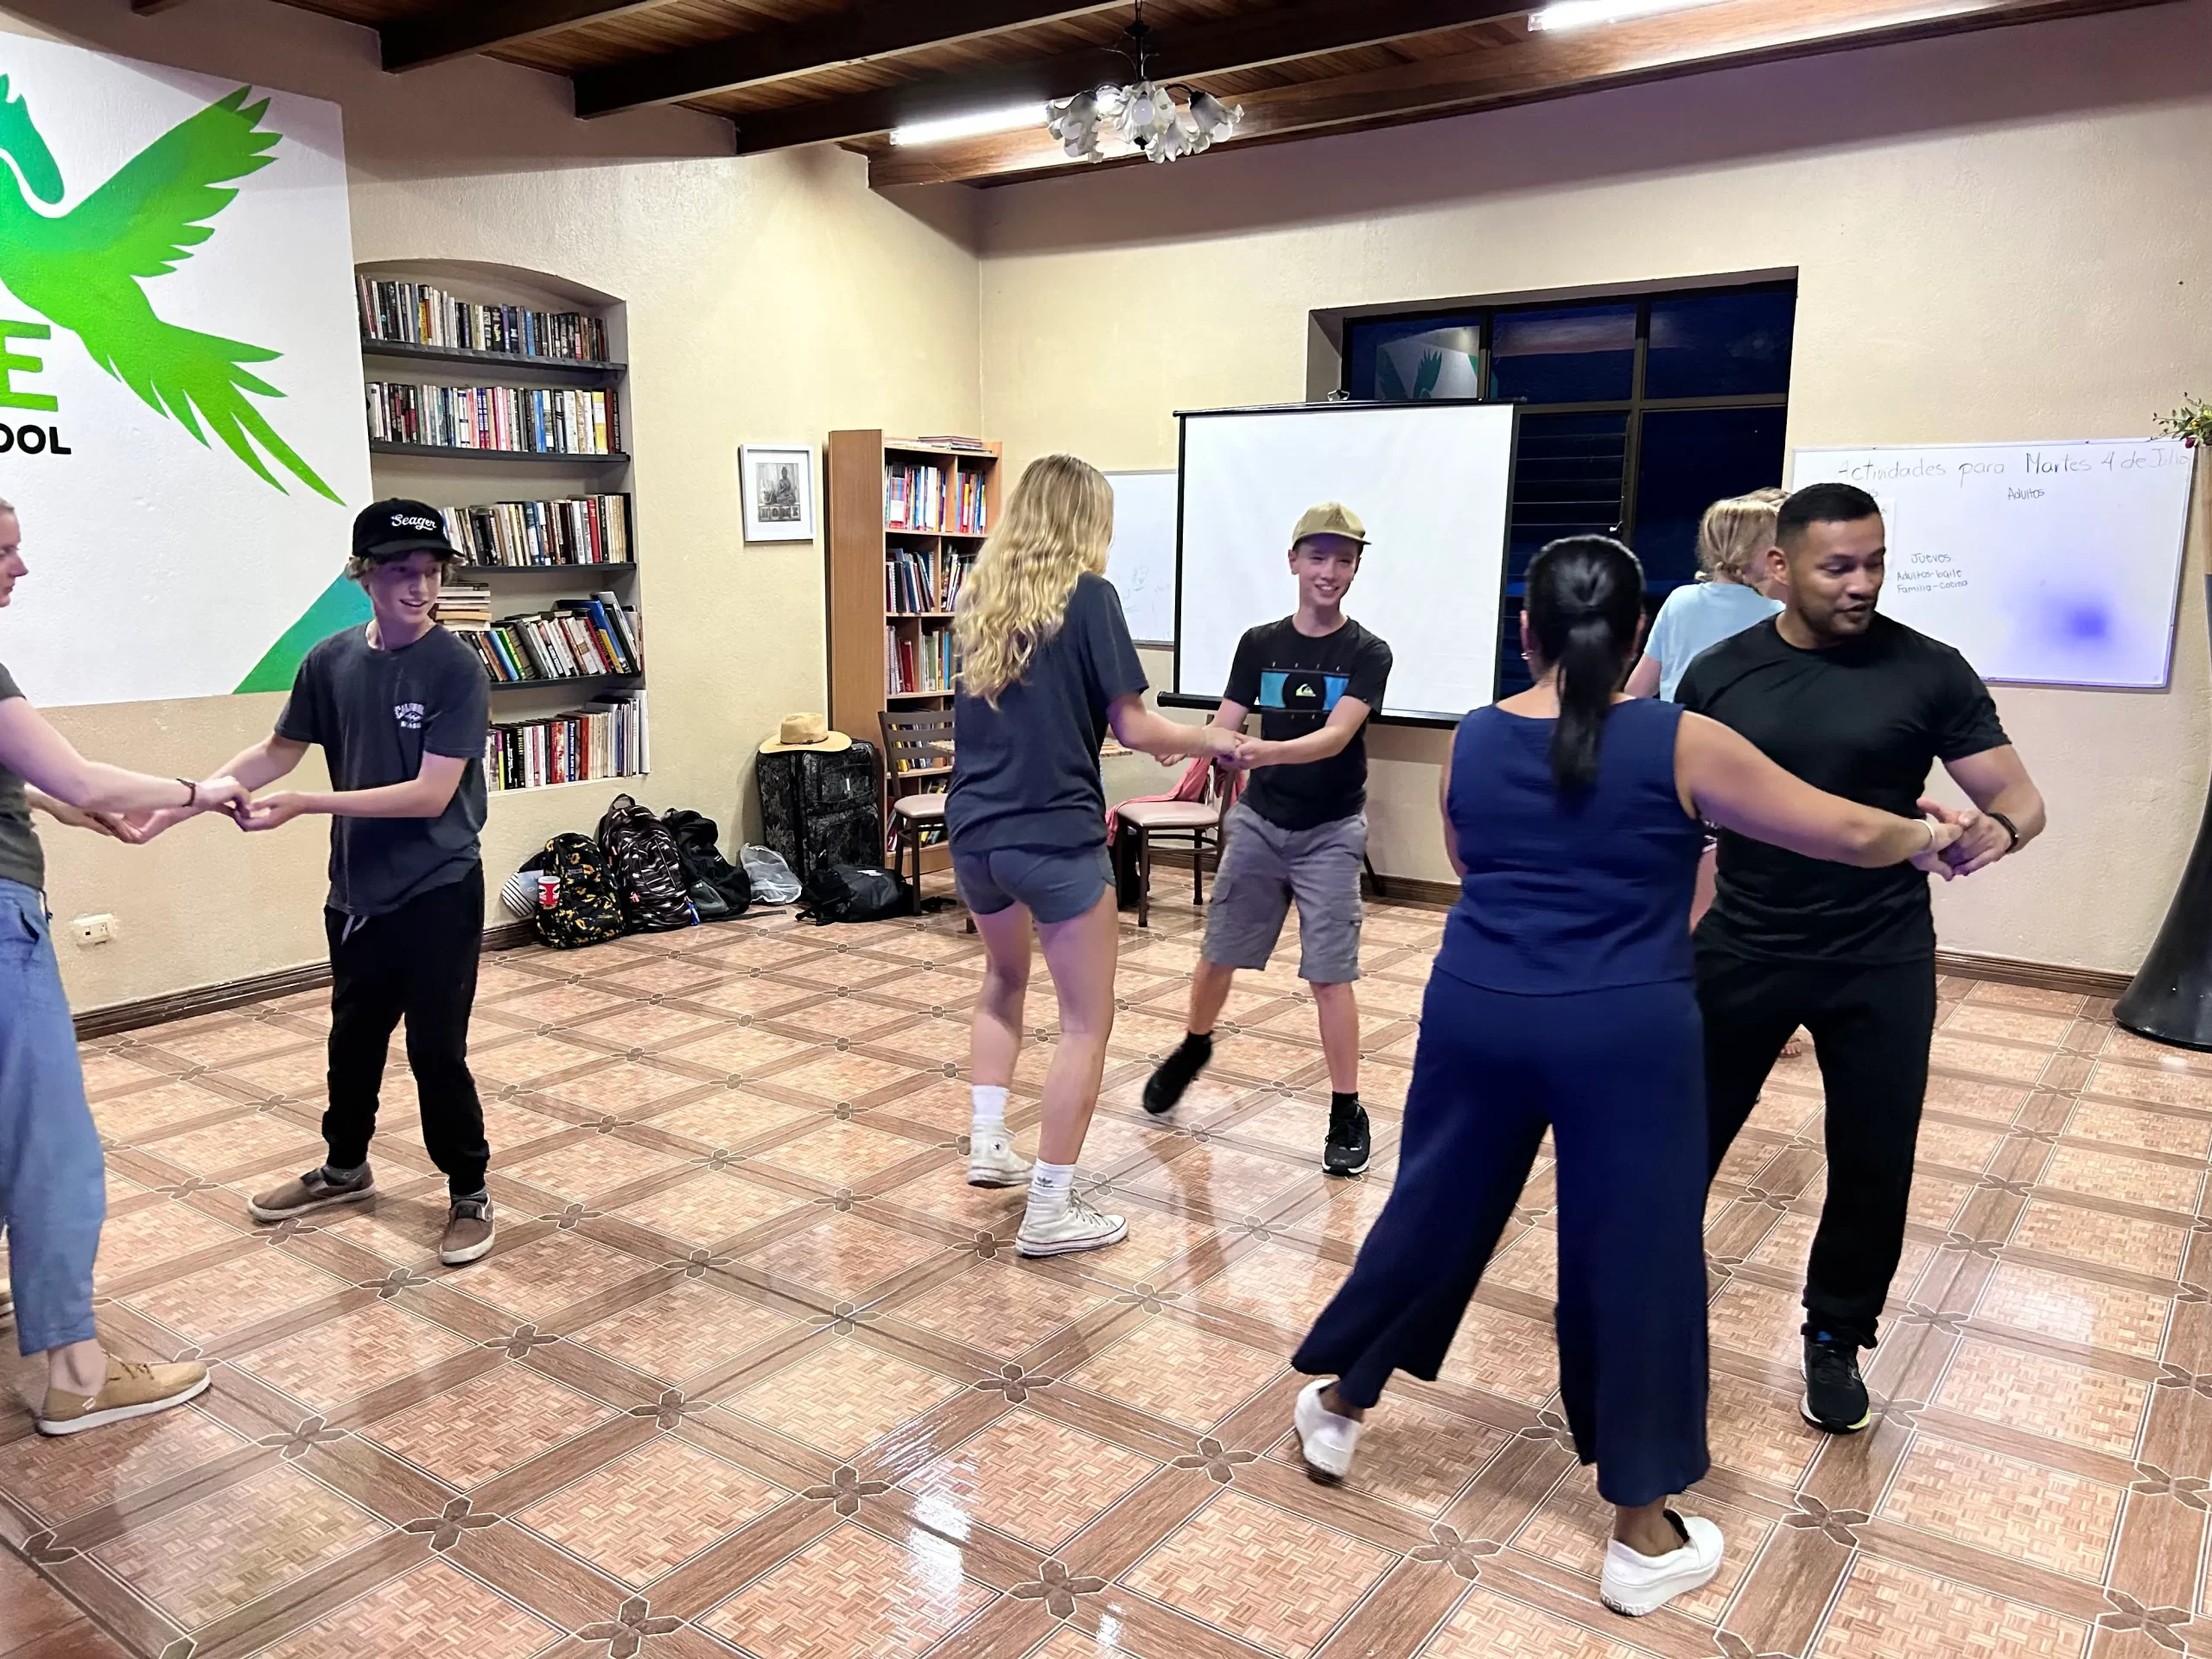 Costa Rica Family Spanish Immersion Trip - Dancing lessons